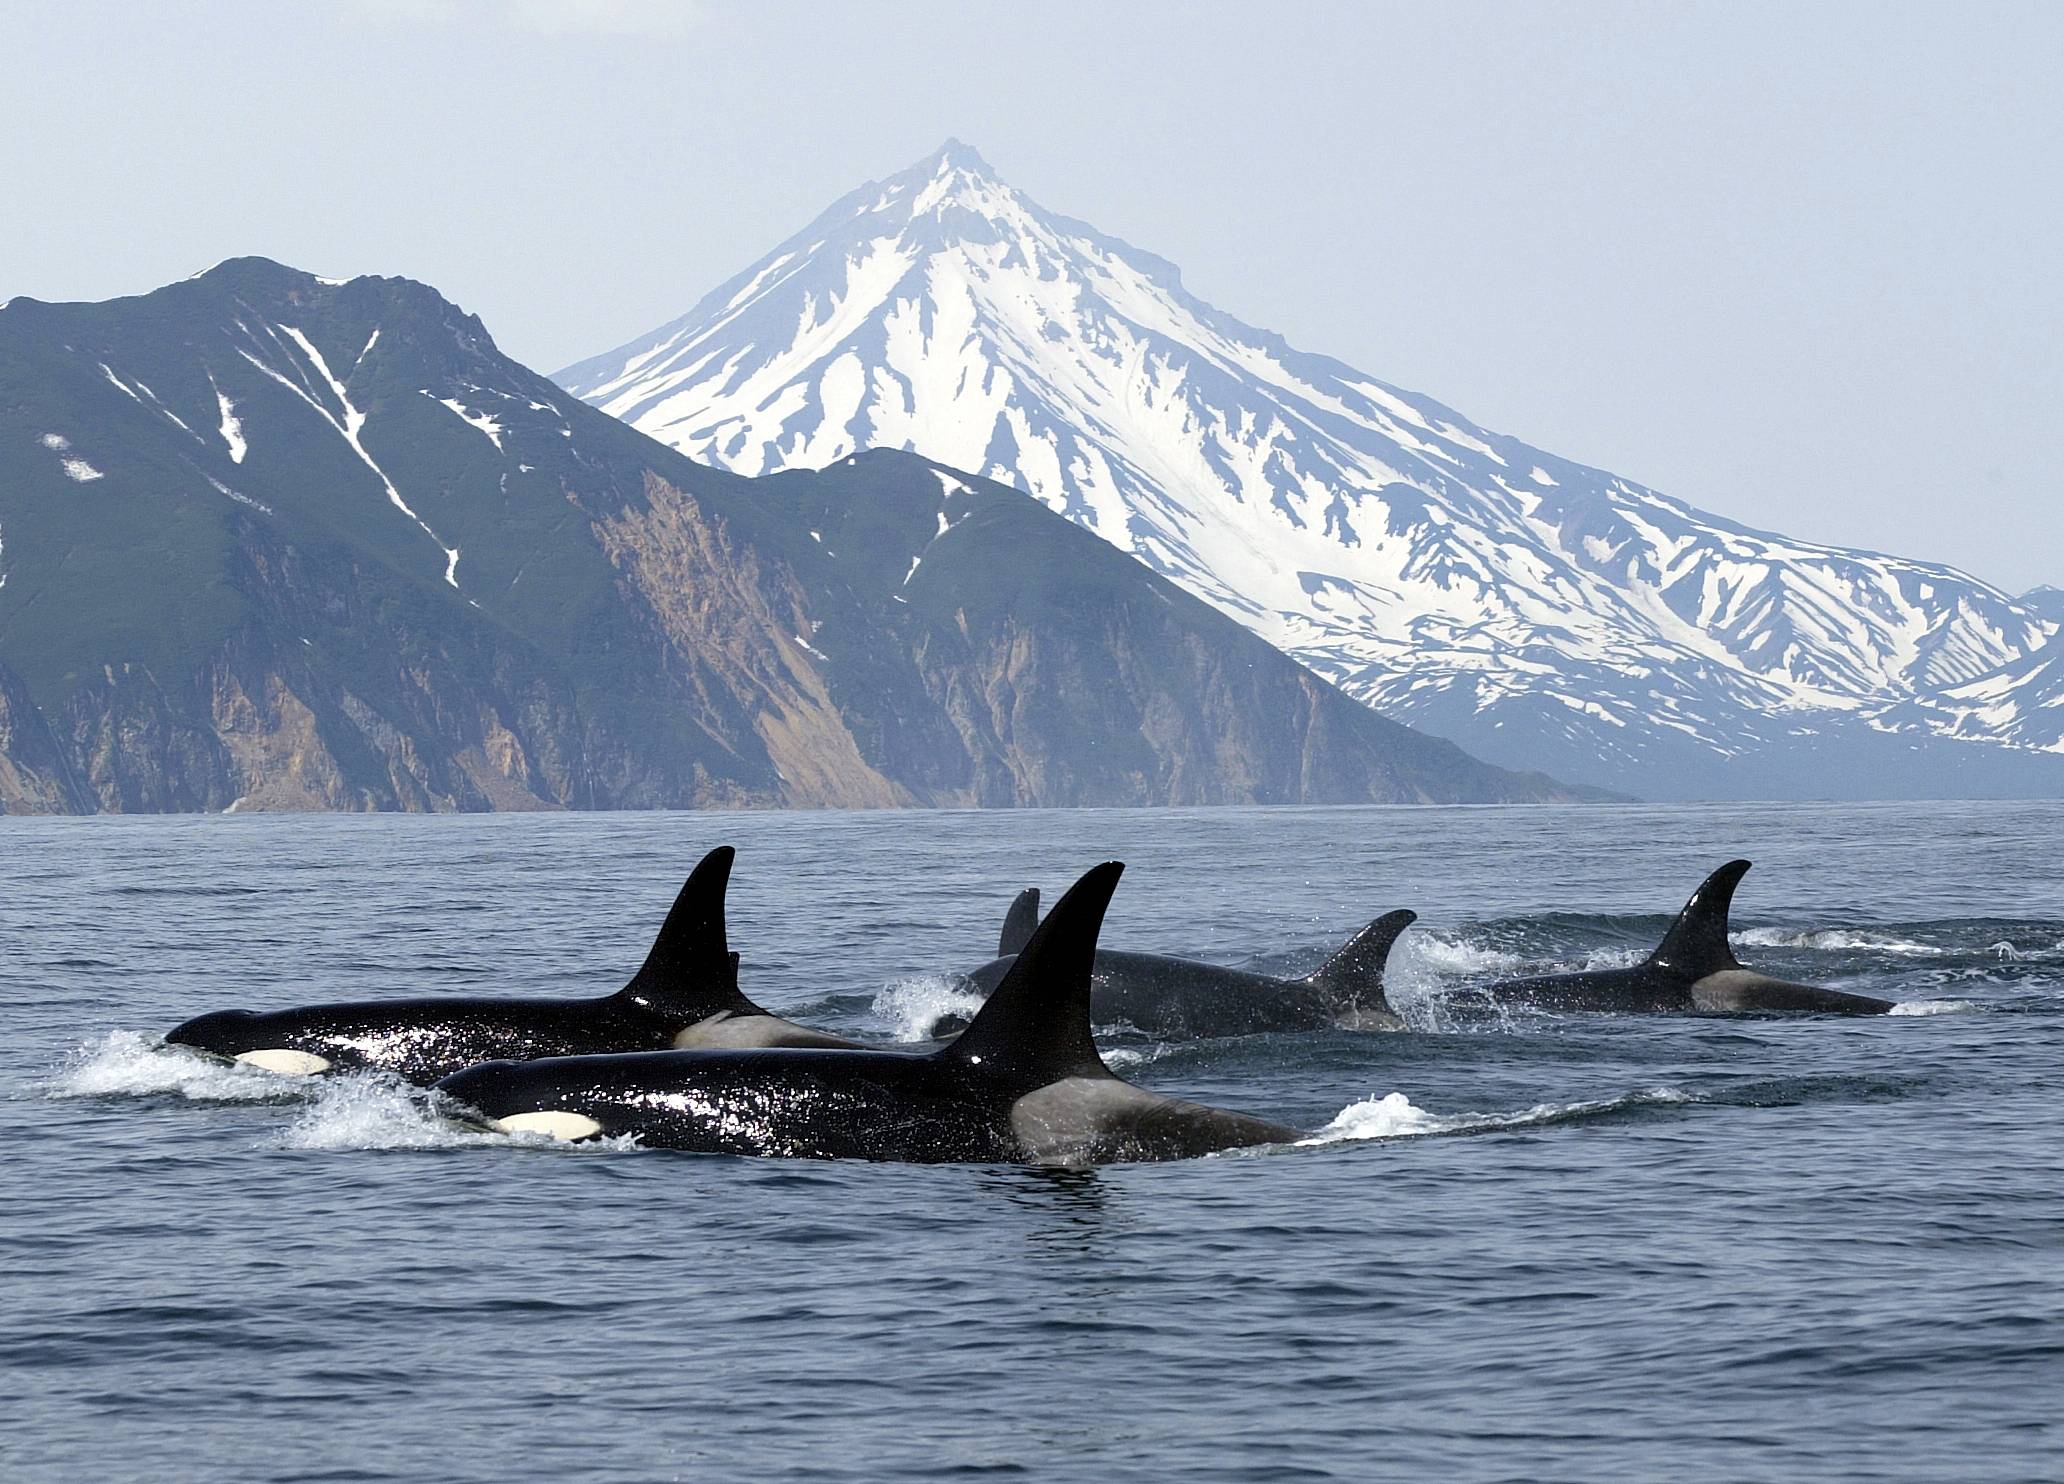 A pod of orca whales